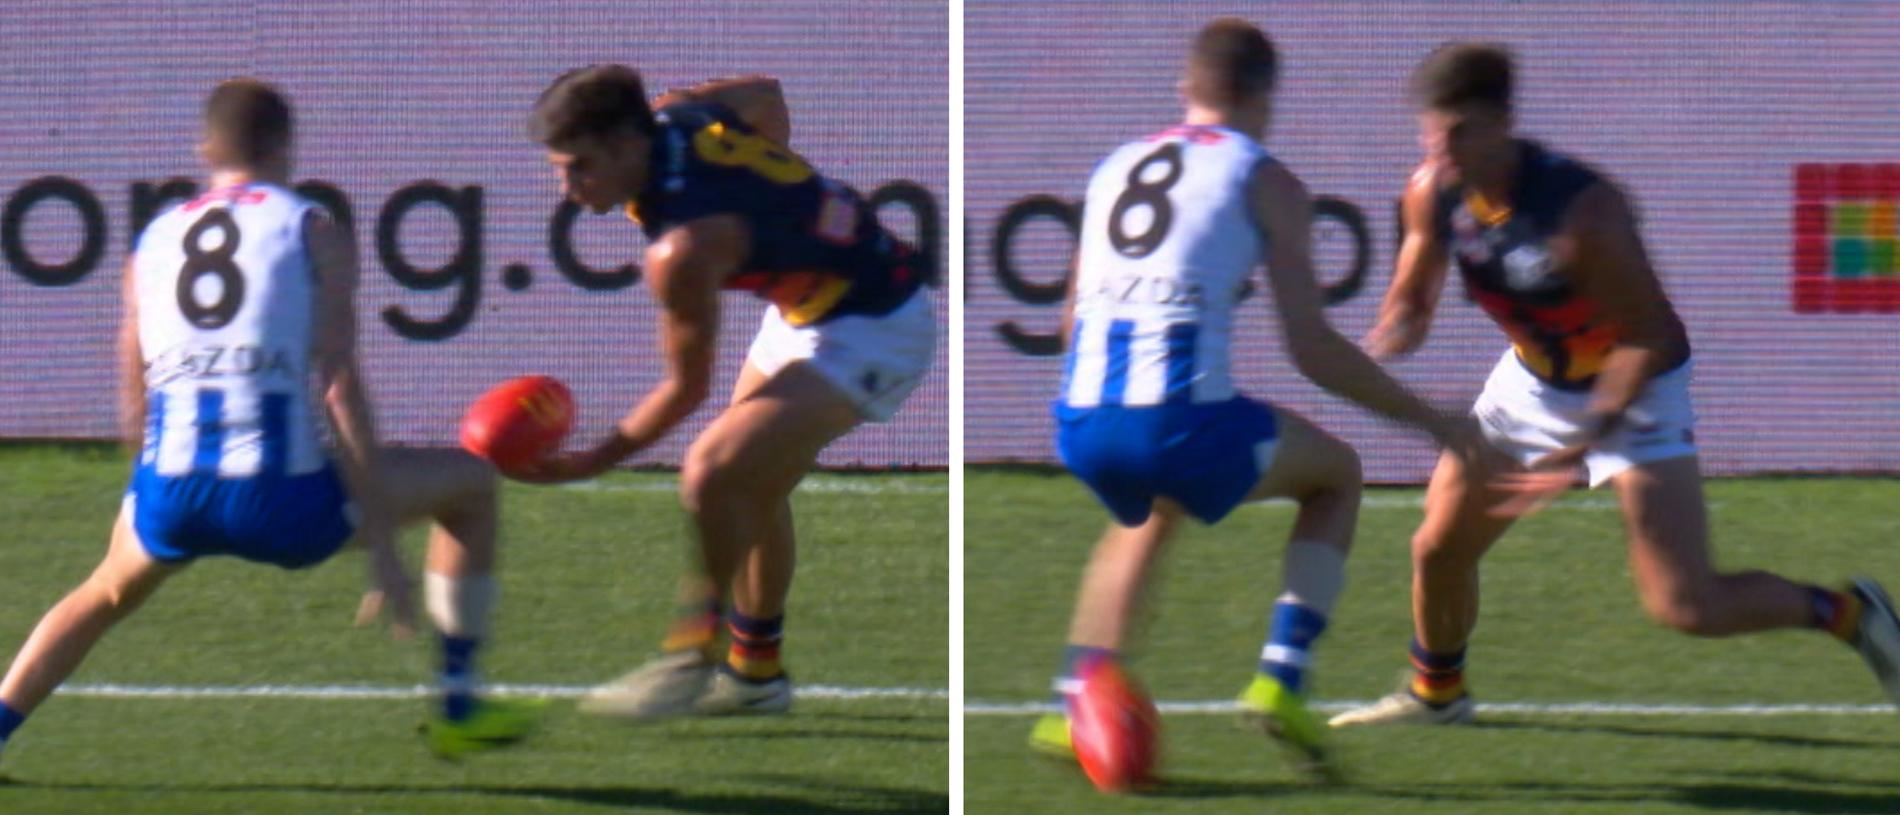 Adelaide's Josh Rachele delivers "the goal assist of the year".